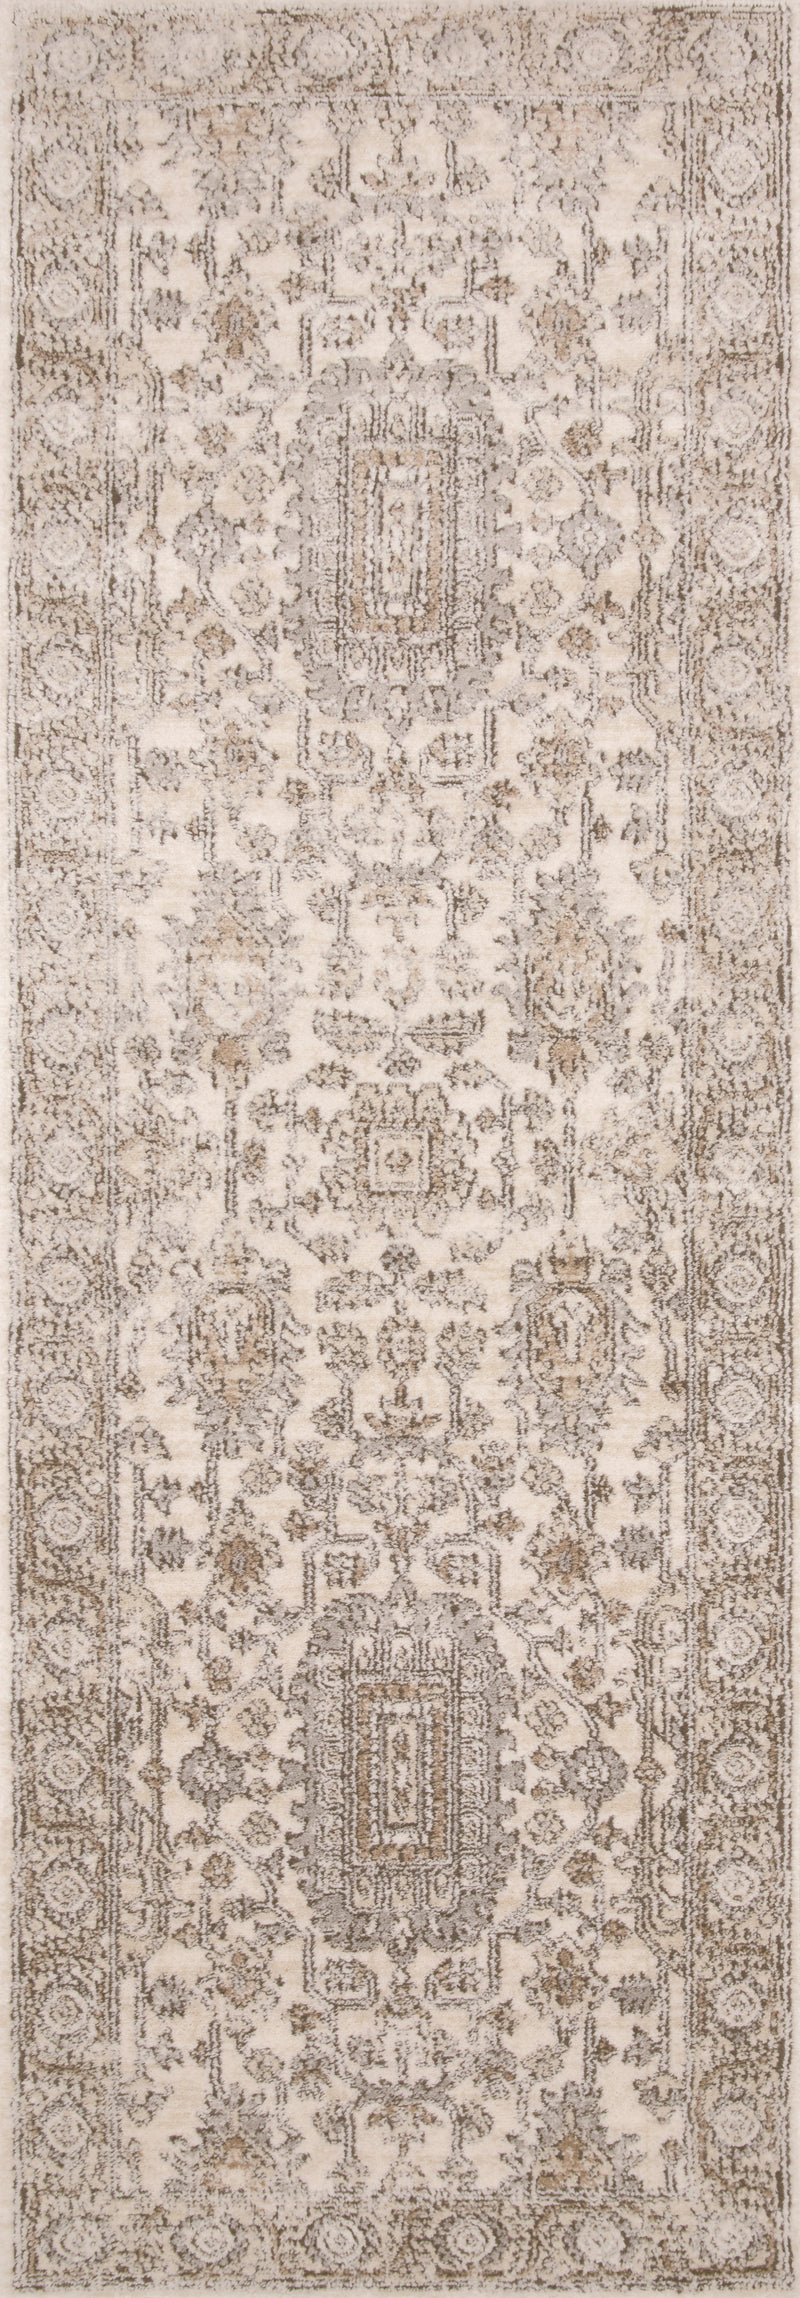 media image for Teagan Rug in Ivory / Sand by Loloi II 276